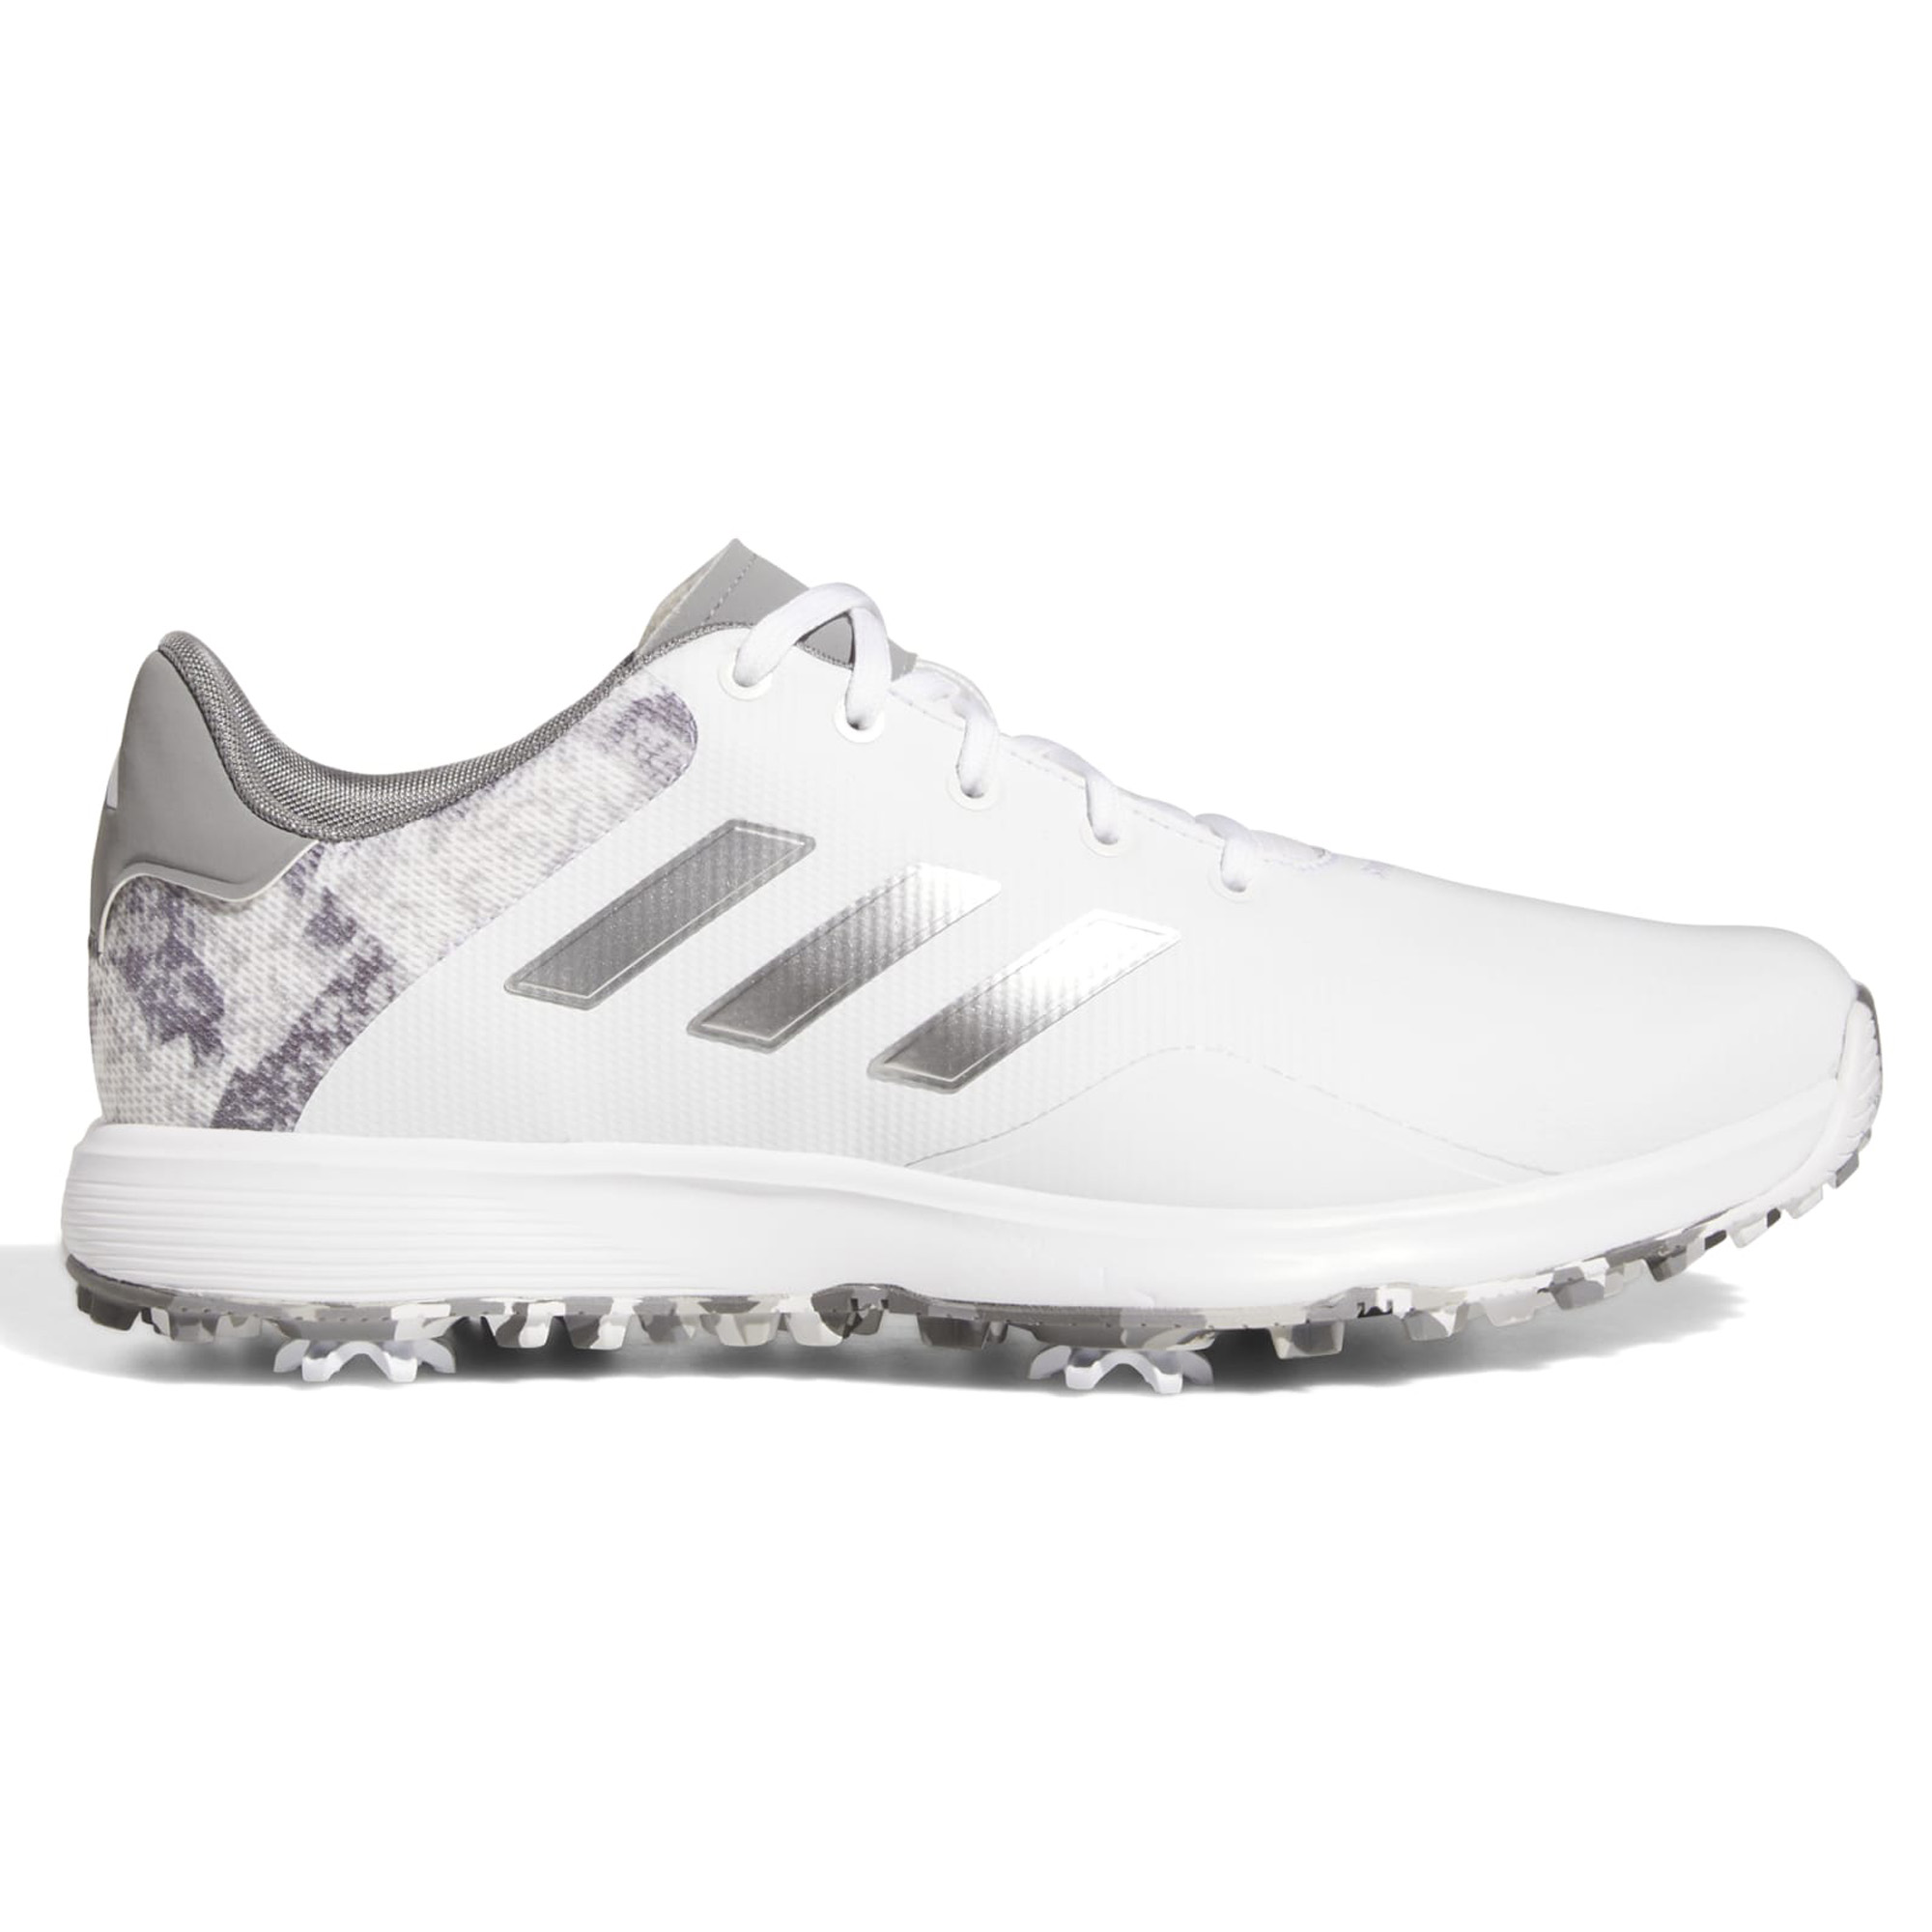 adidas Mens S2G Spiked Waterproof Golf Shoes